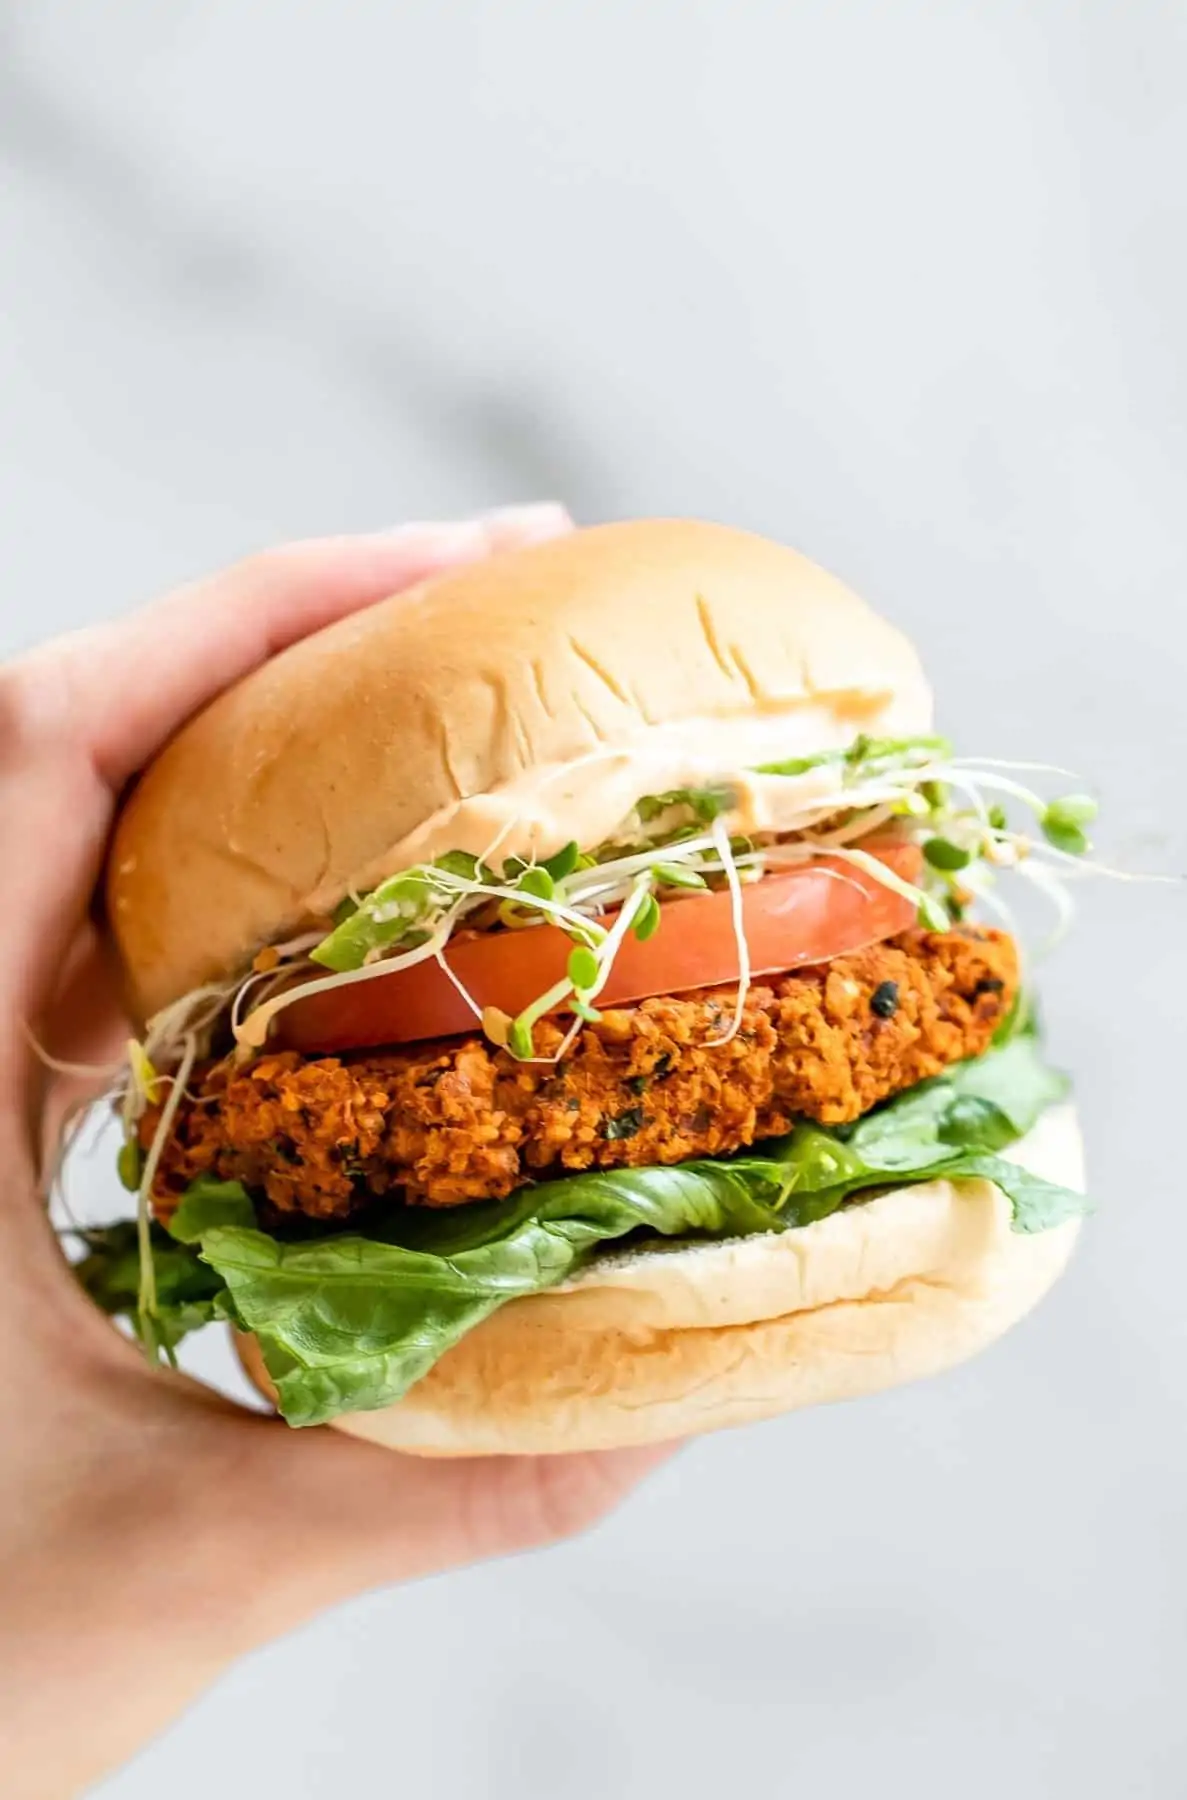 Hand holding up a chickpea burger with lettuce and tomato.